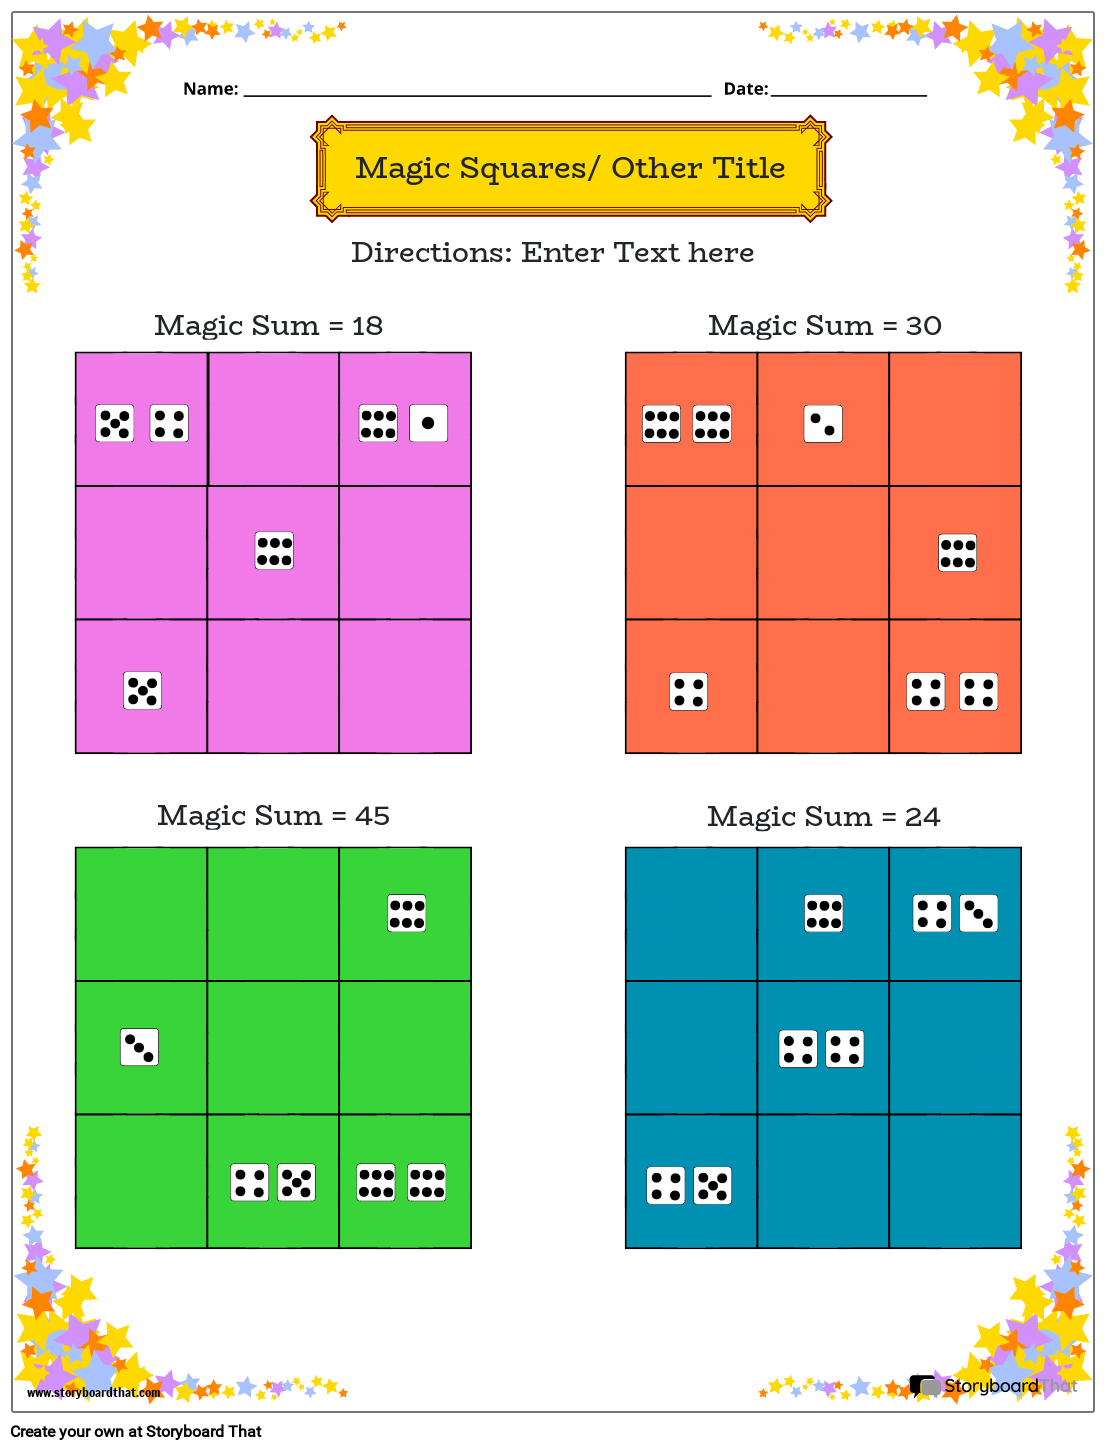 Dice count magic squares worksheet with star theme